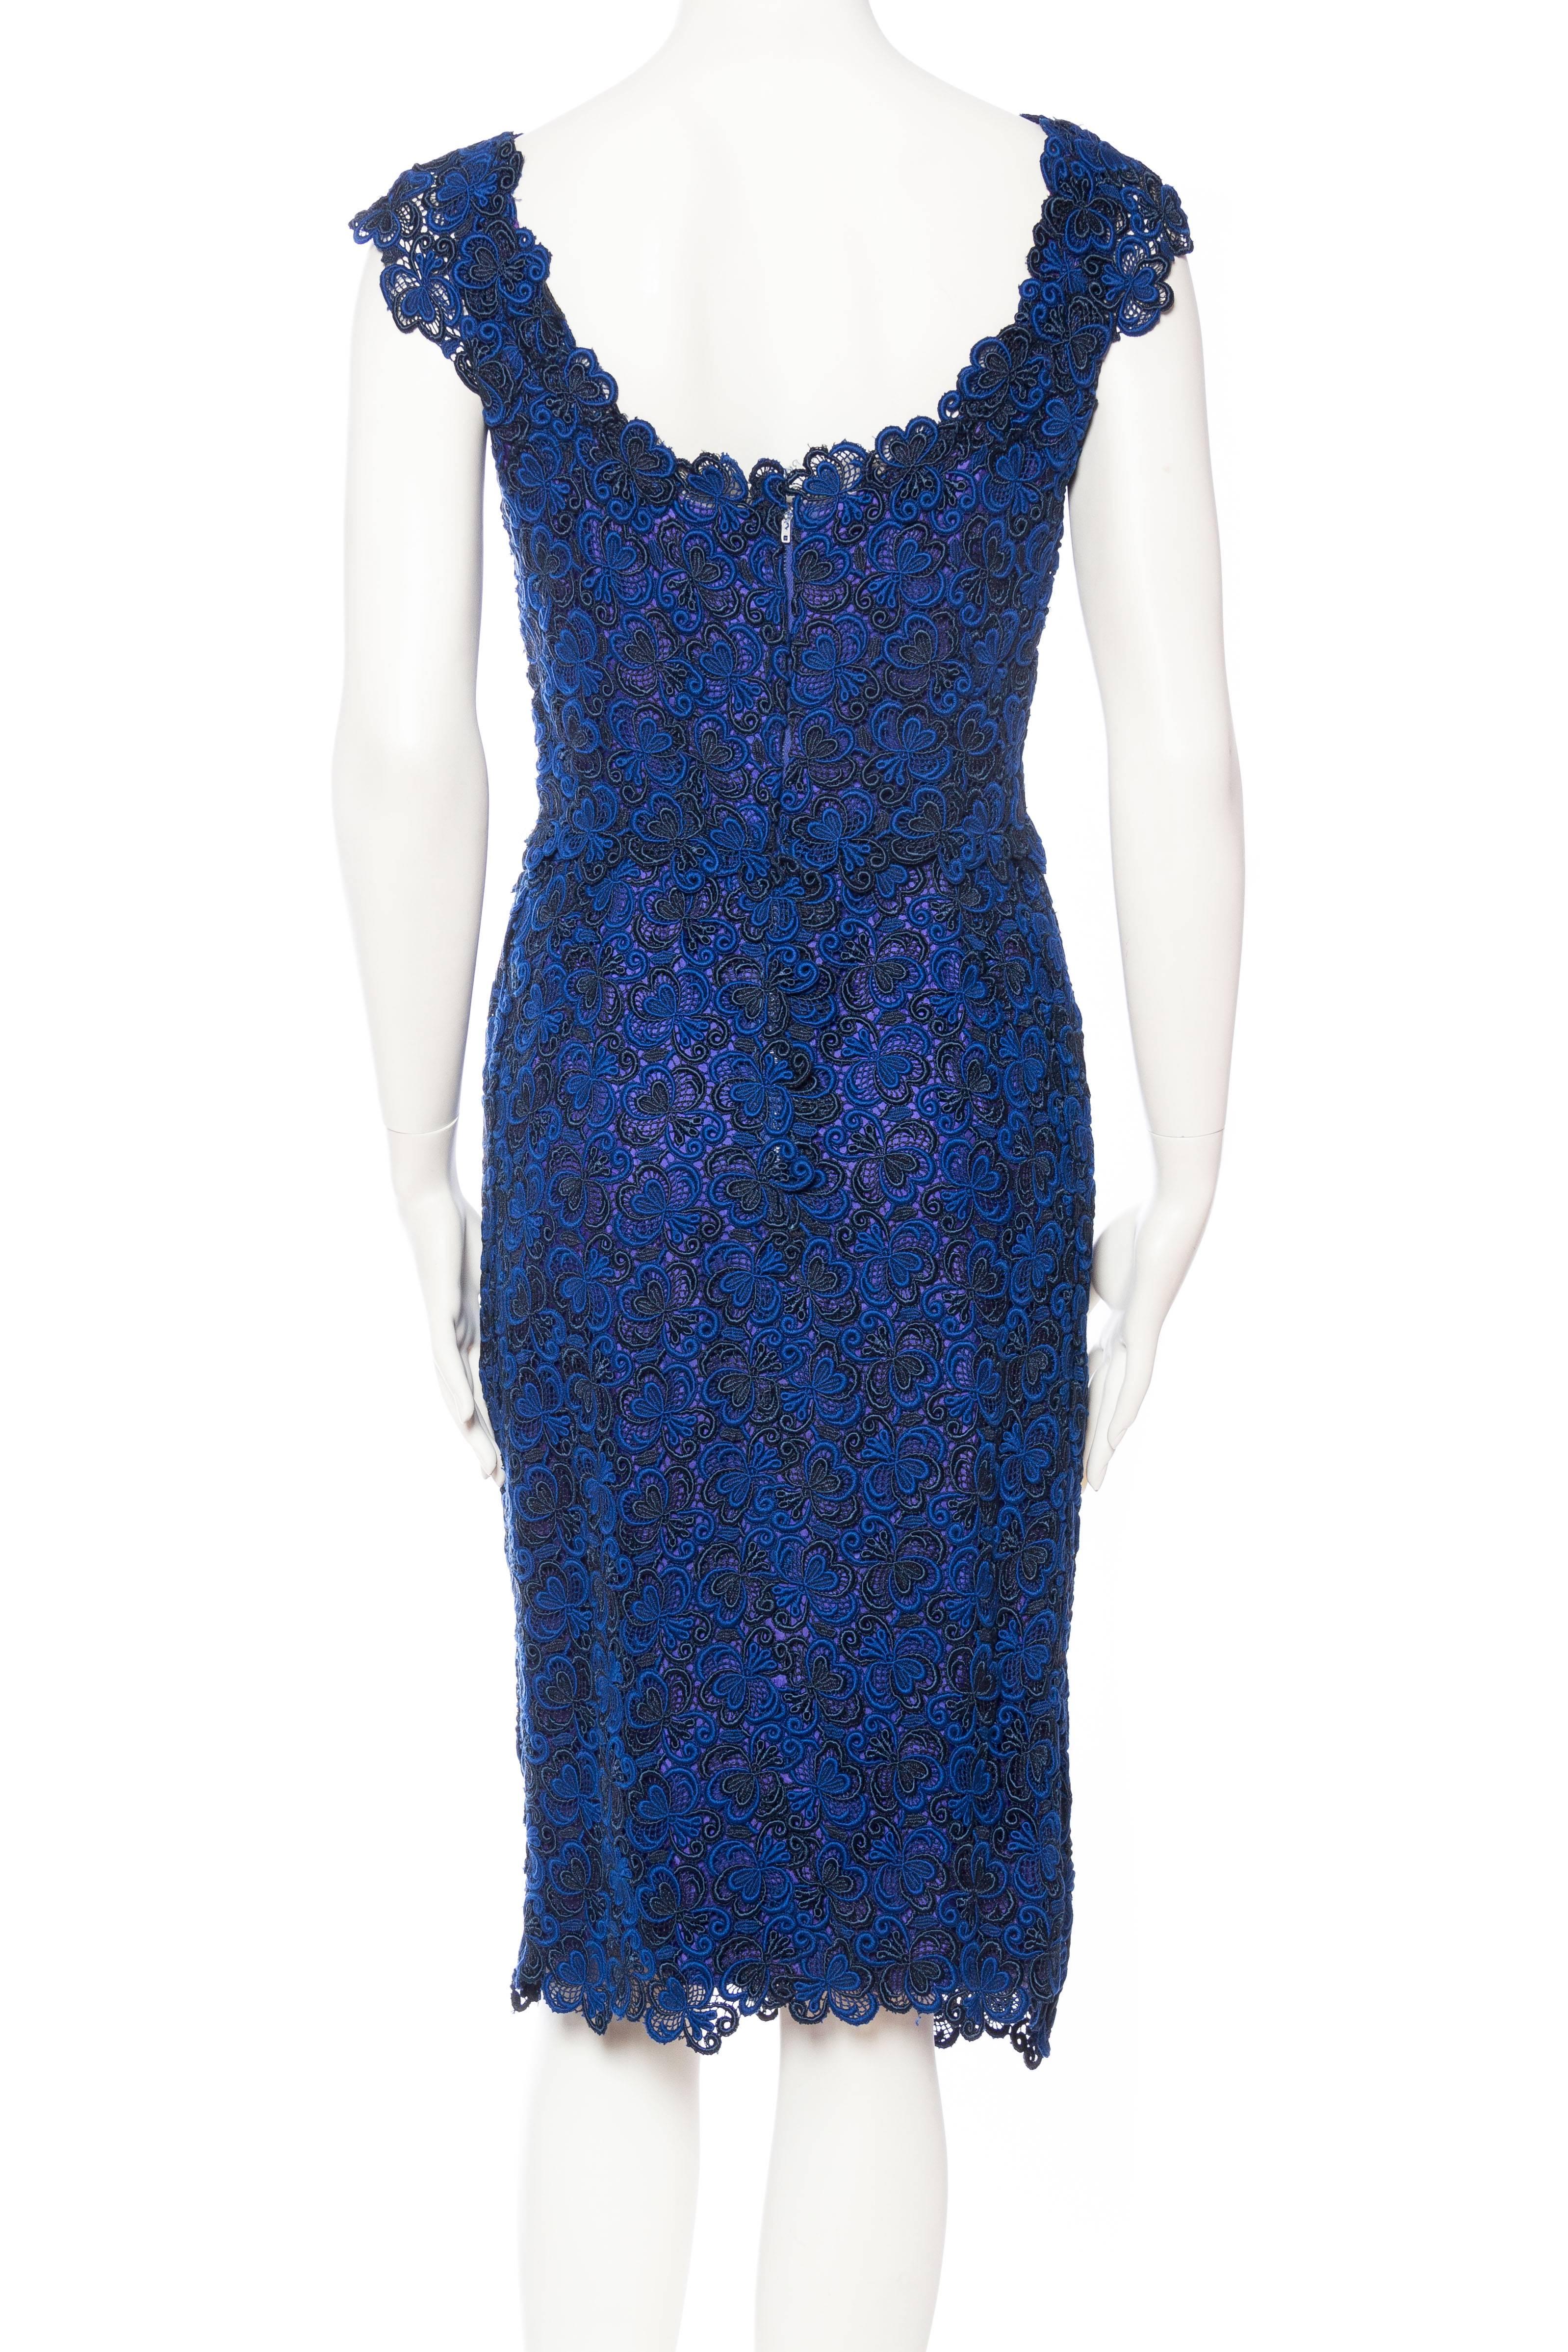 1950S Black & Sapphire Blue  Rayon Lace Cocktail Dress In Excellent Condition For Sale In New York, NY